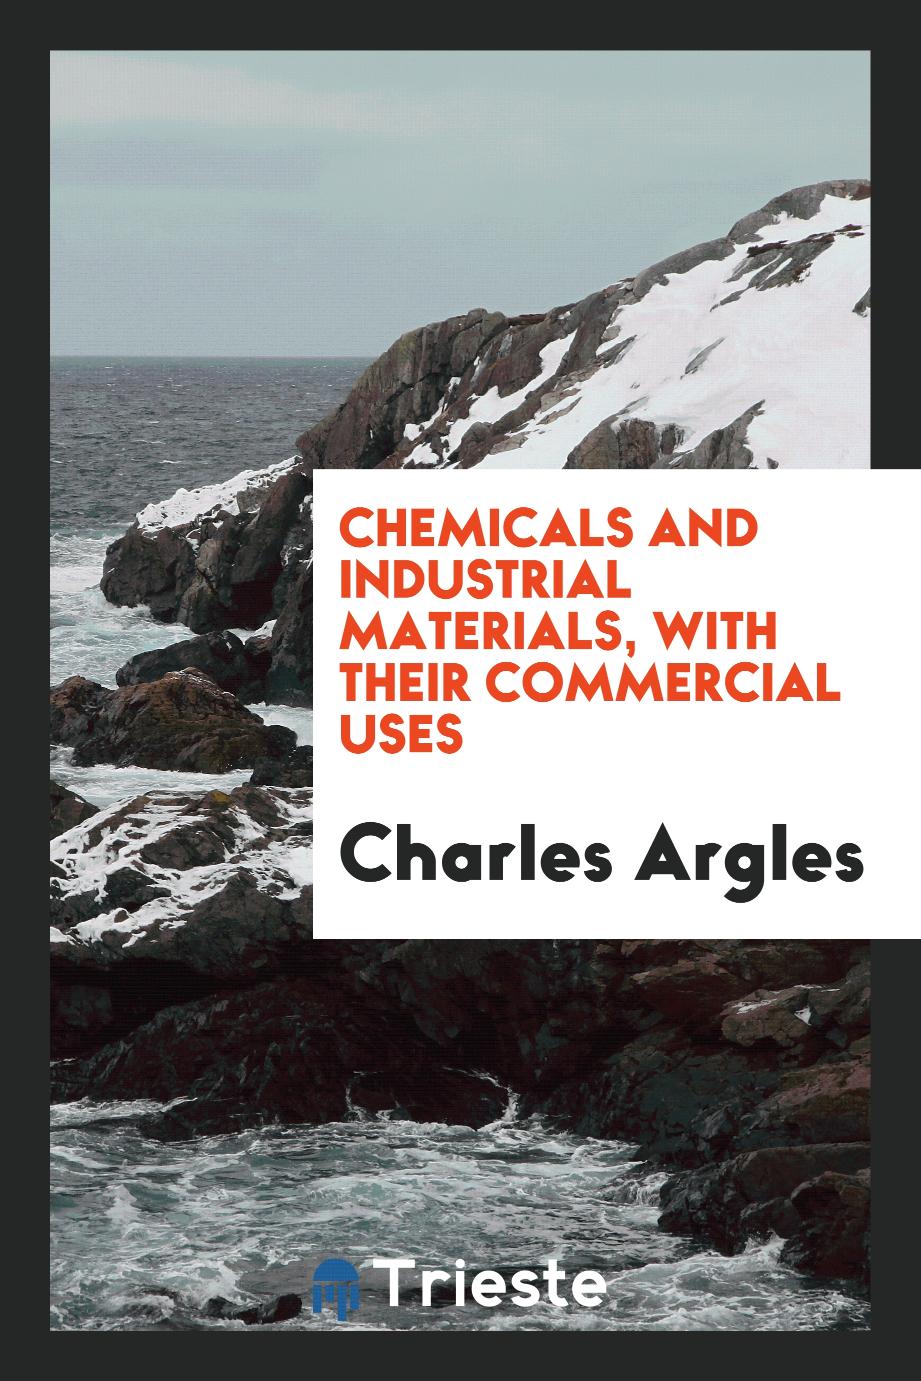 Chemicals and industrial materials, with their commercial uses